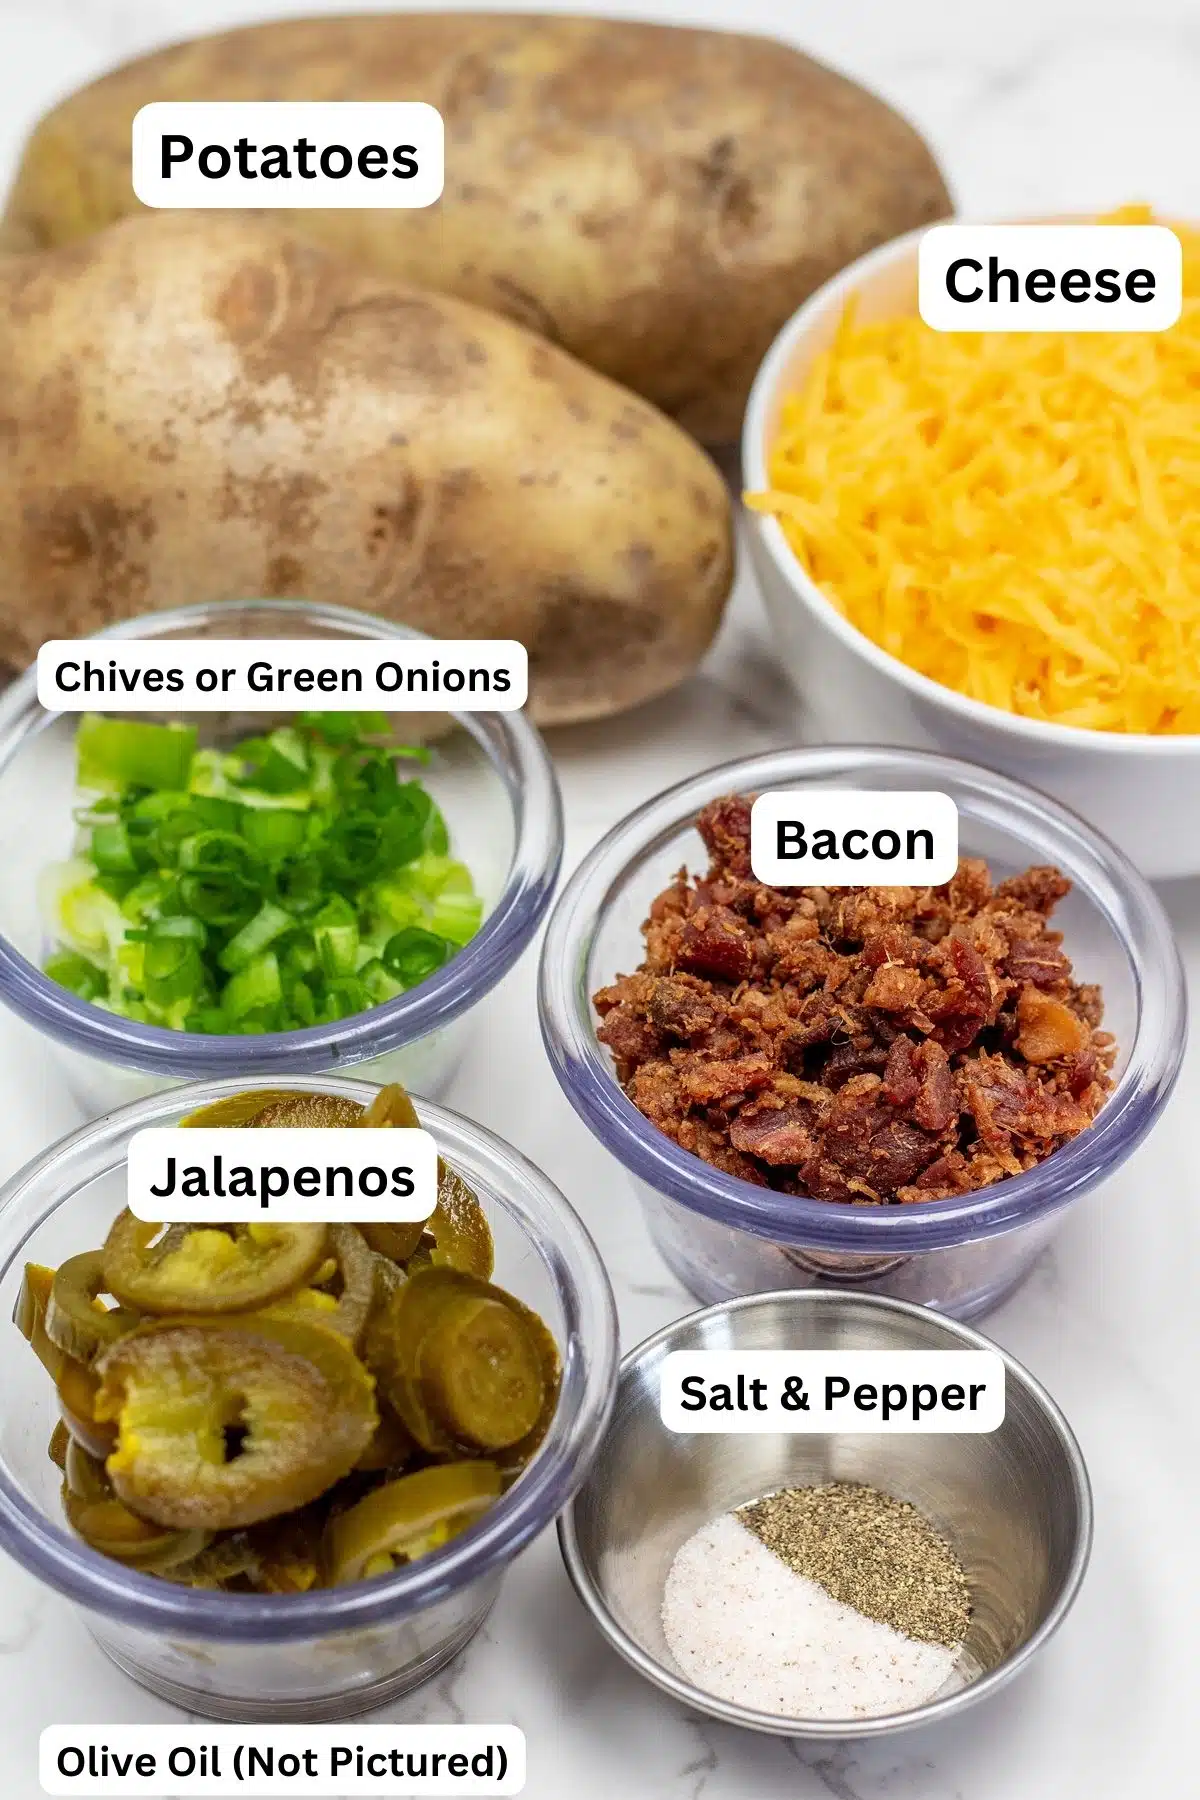 Tall image of Irish nachos ingredients with labels.